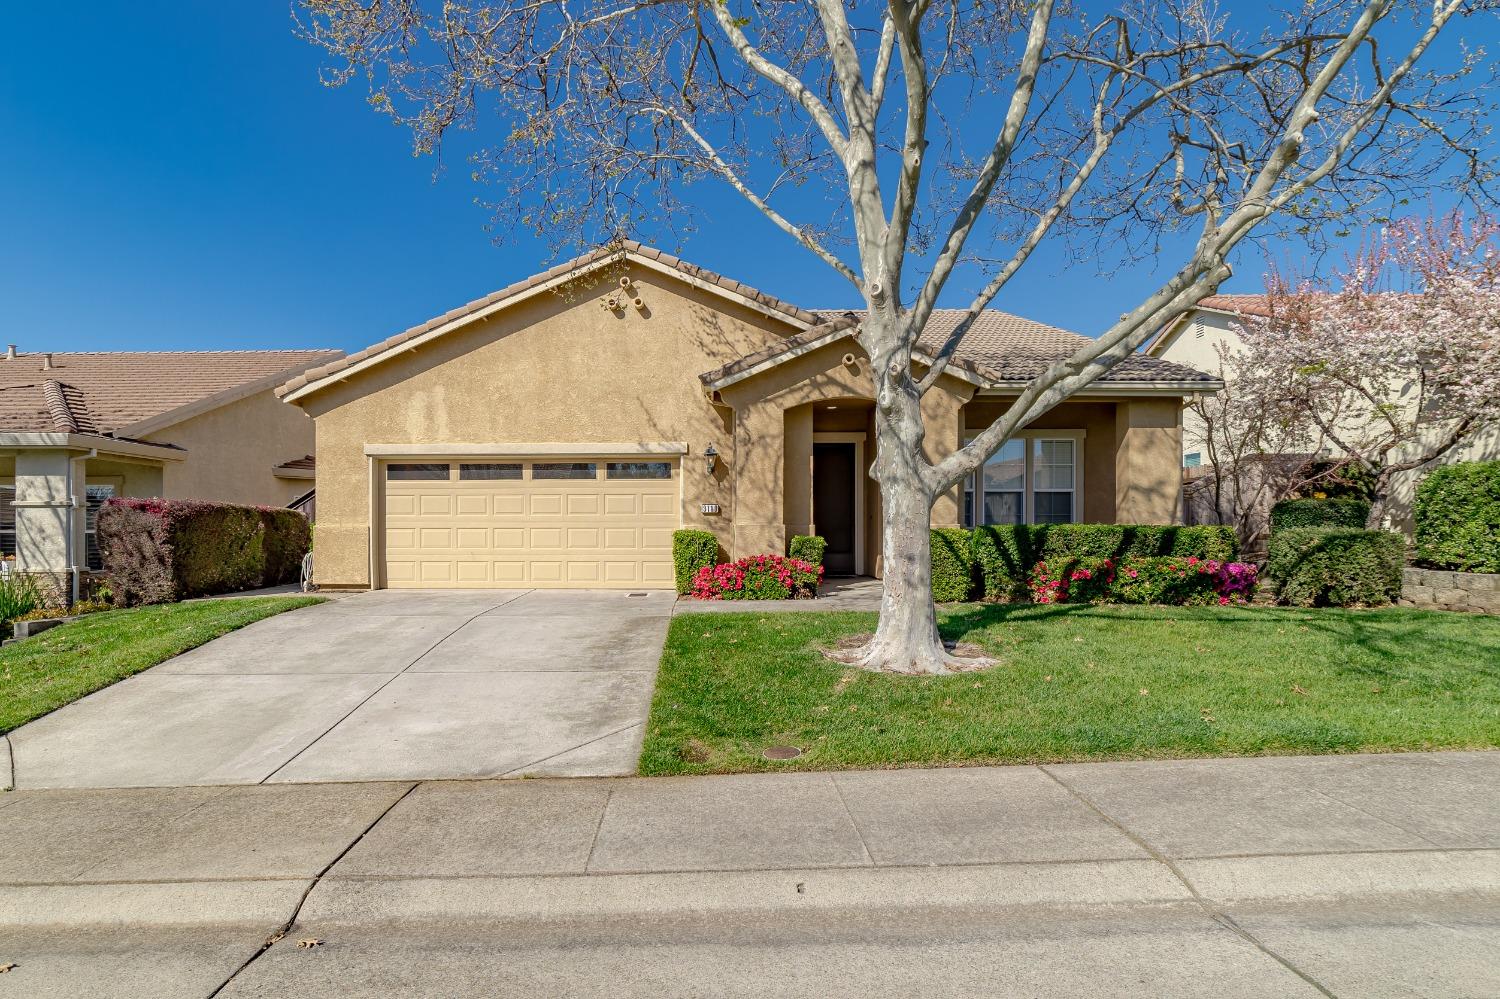 Photo of 3110 Clarkson Dr in Rocklin, CA